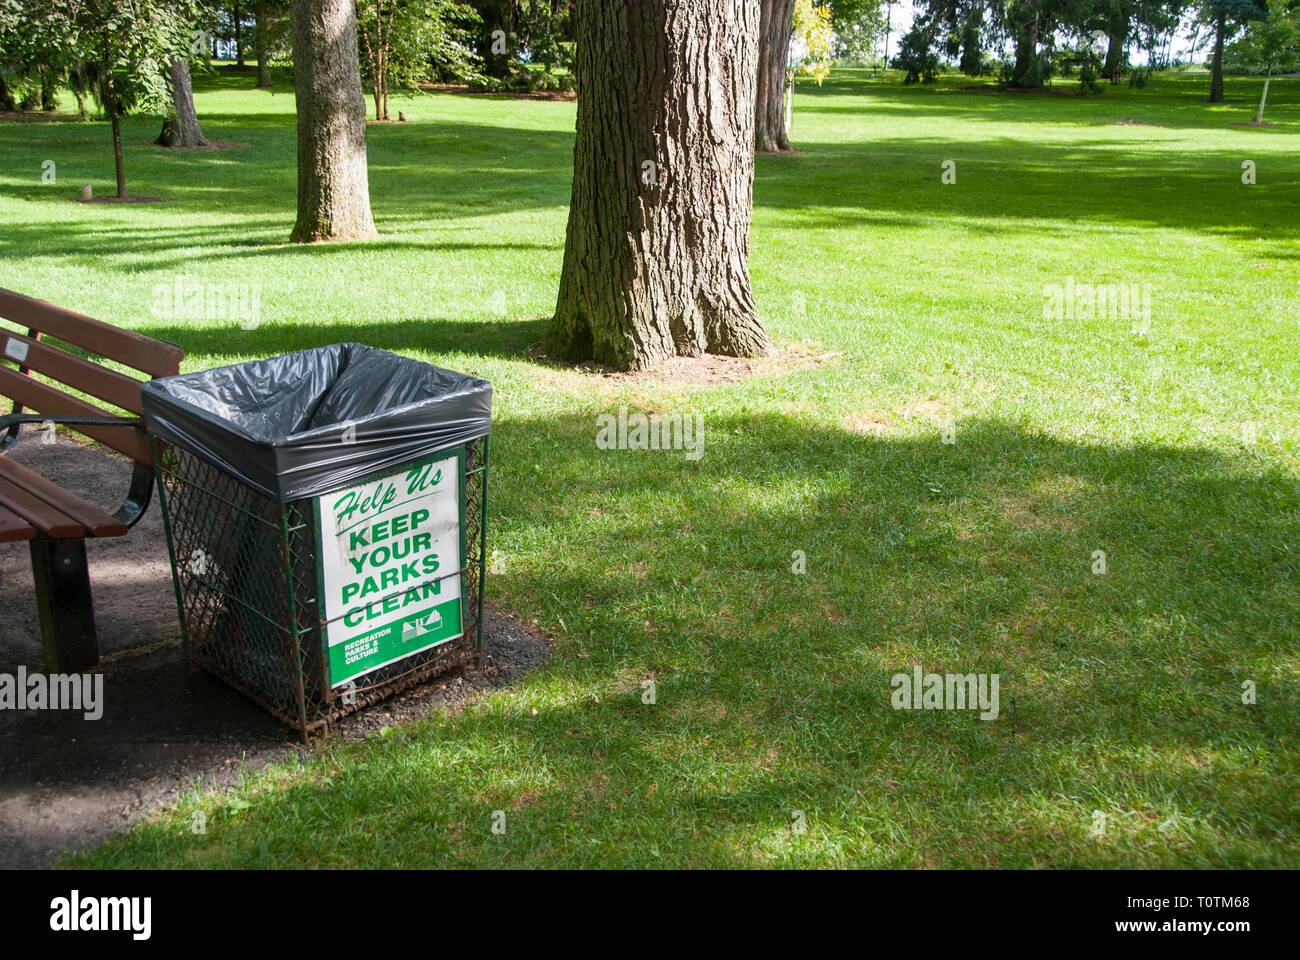 A metal litter bin in a Toronto park encouraging visitors to keep the area clean. Stock Photo